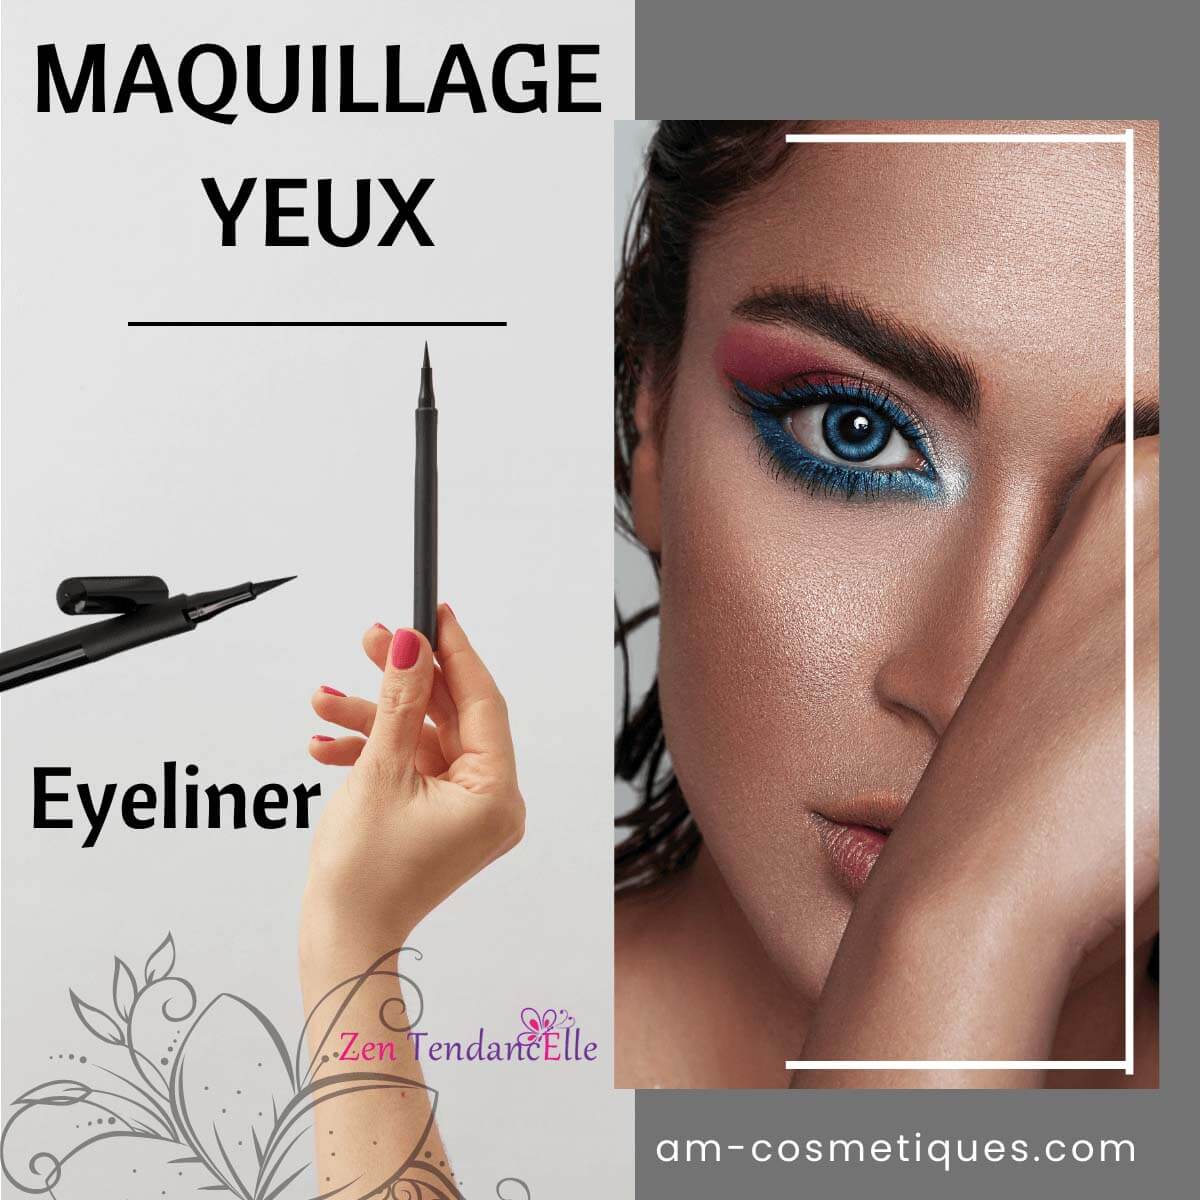 Eyeliner_maquillage_makeup_Yeux_pas_cher_AM-Cosmetiques.jpg